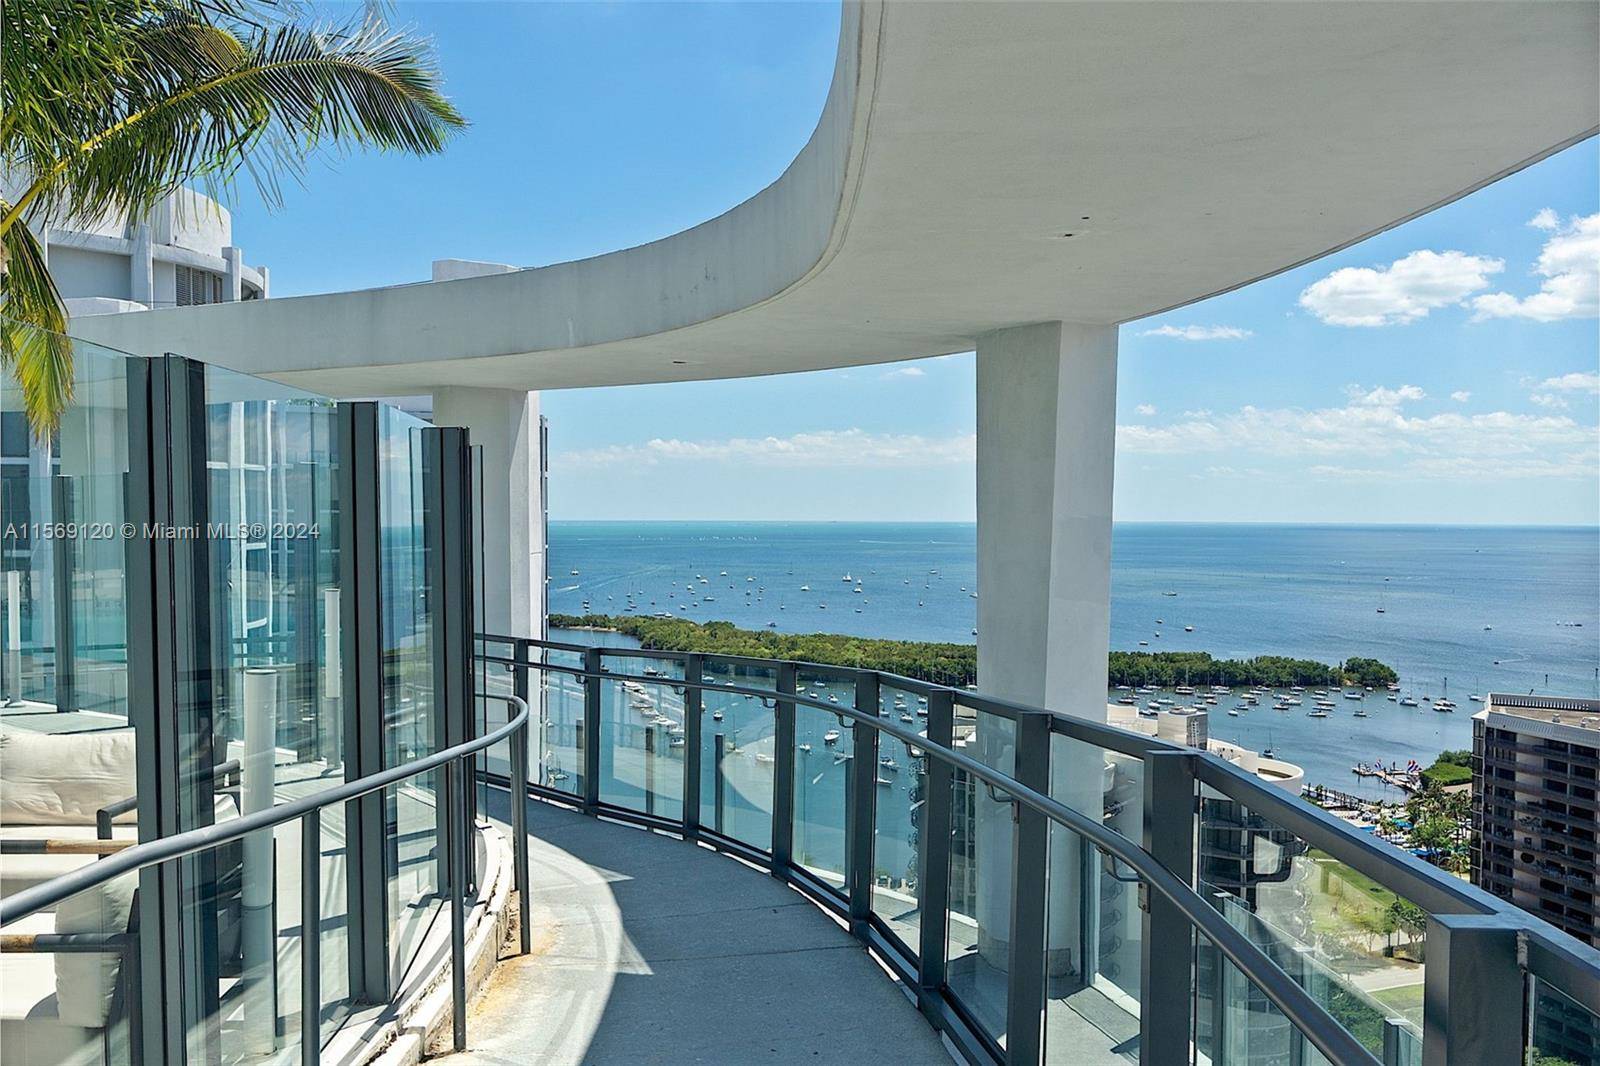 Nestled in the serene Coconut Grove, Park Grove stands as a testament to luxury and design.